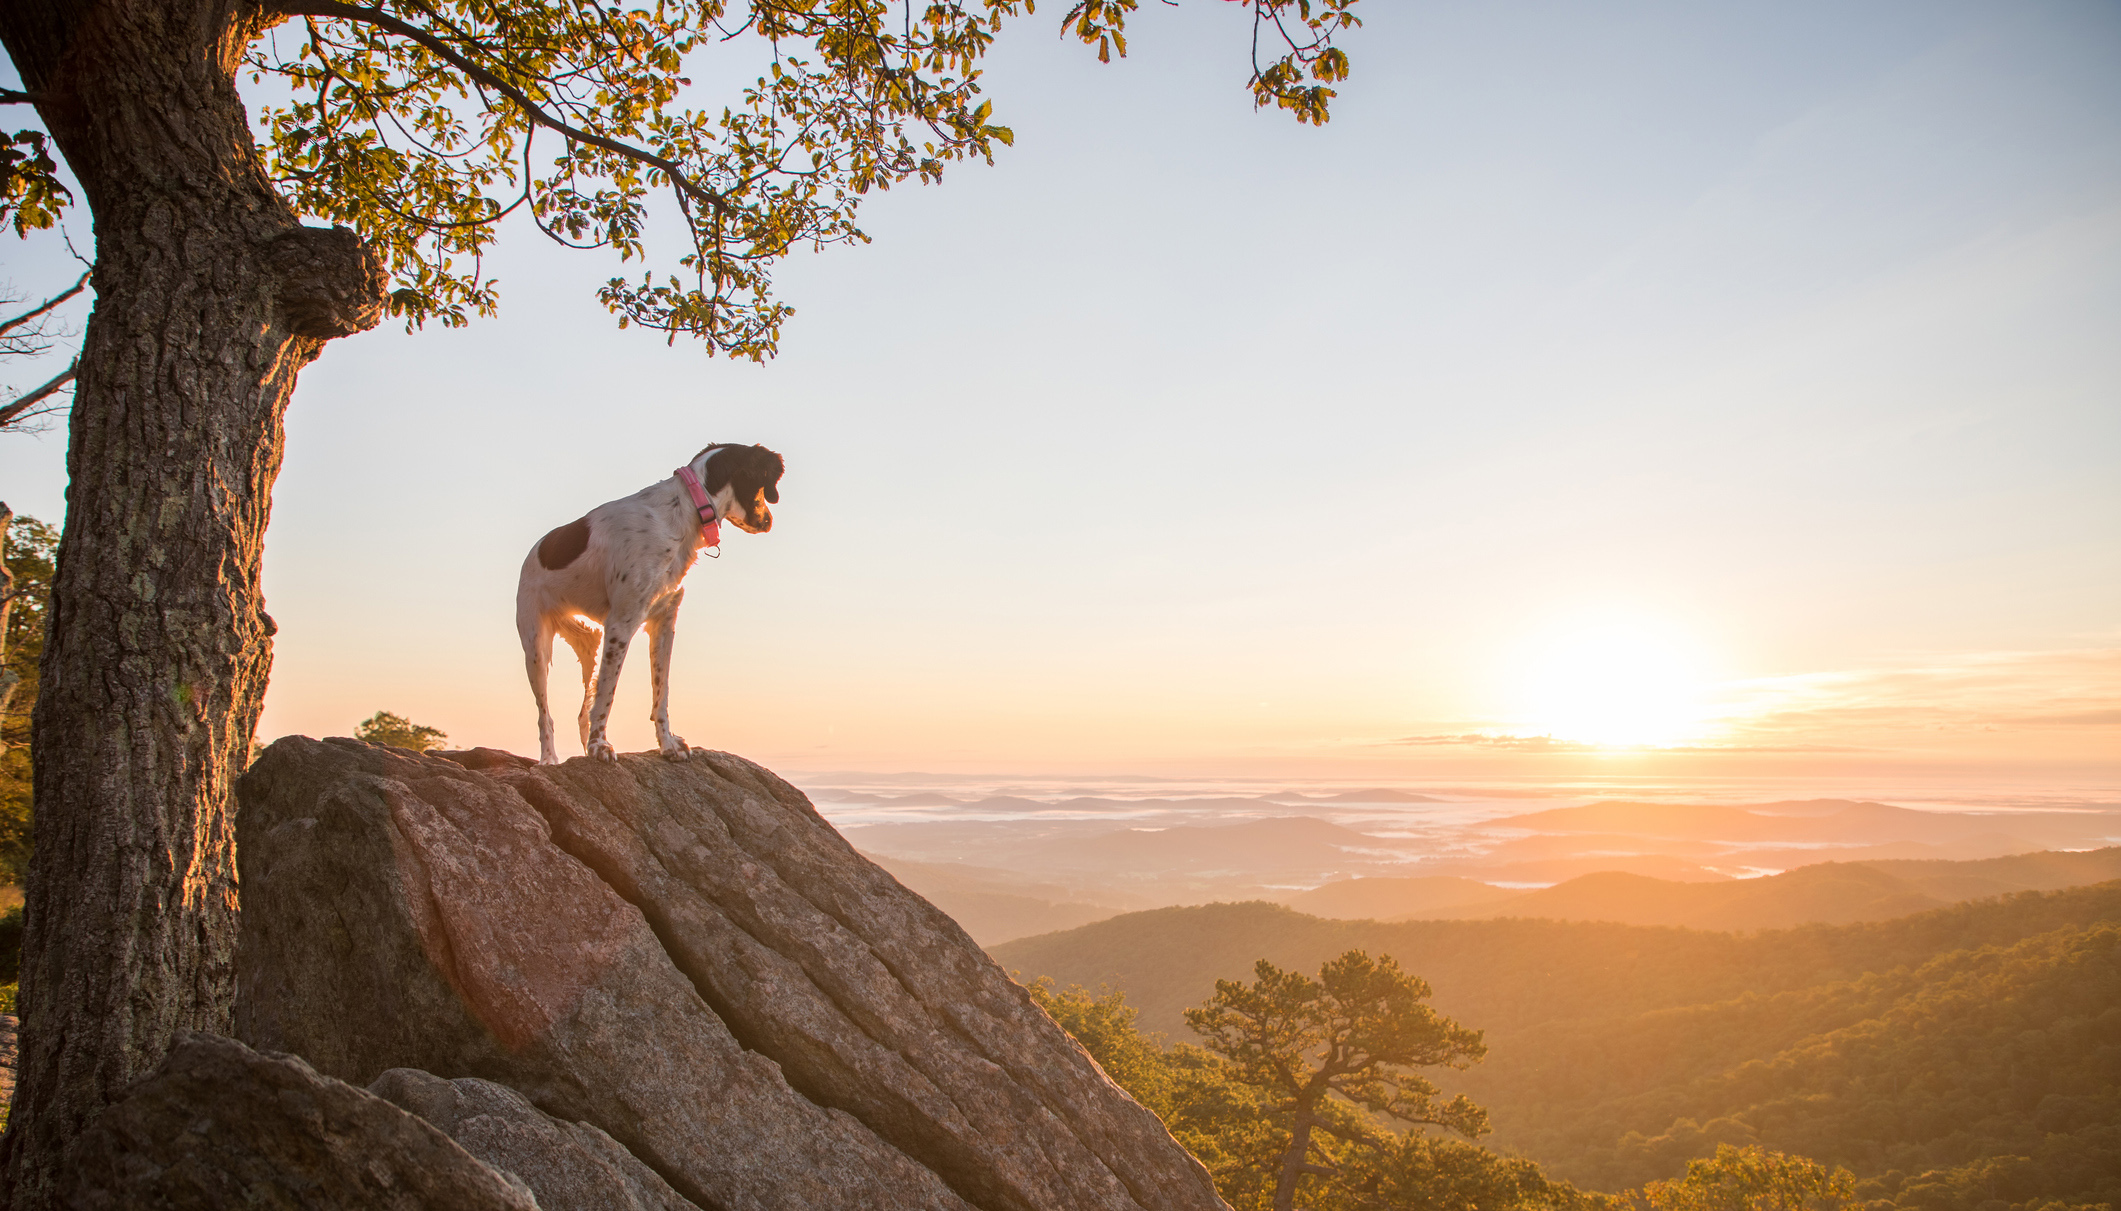 Dog standing on a rocky promontory watches the sunrise.